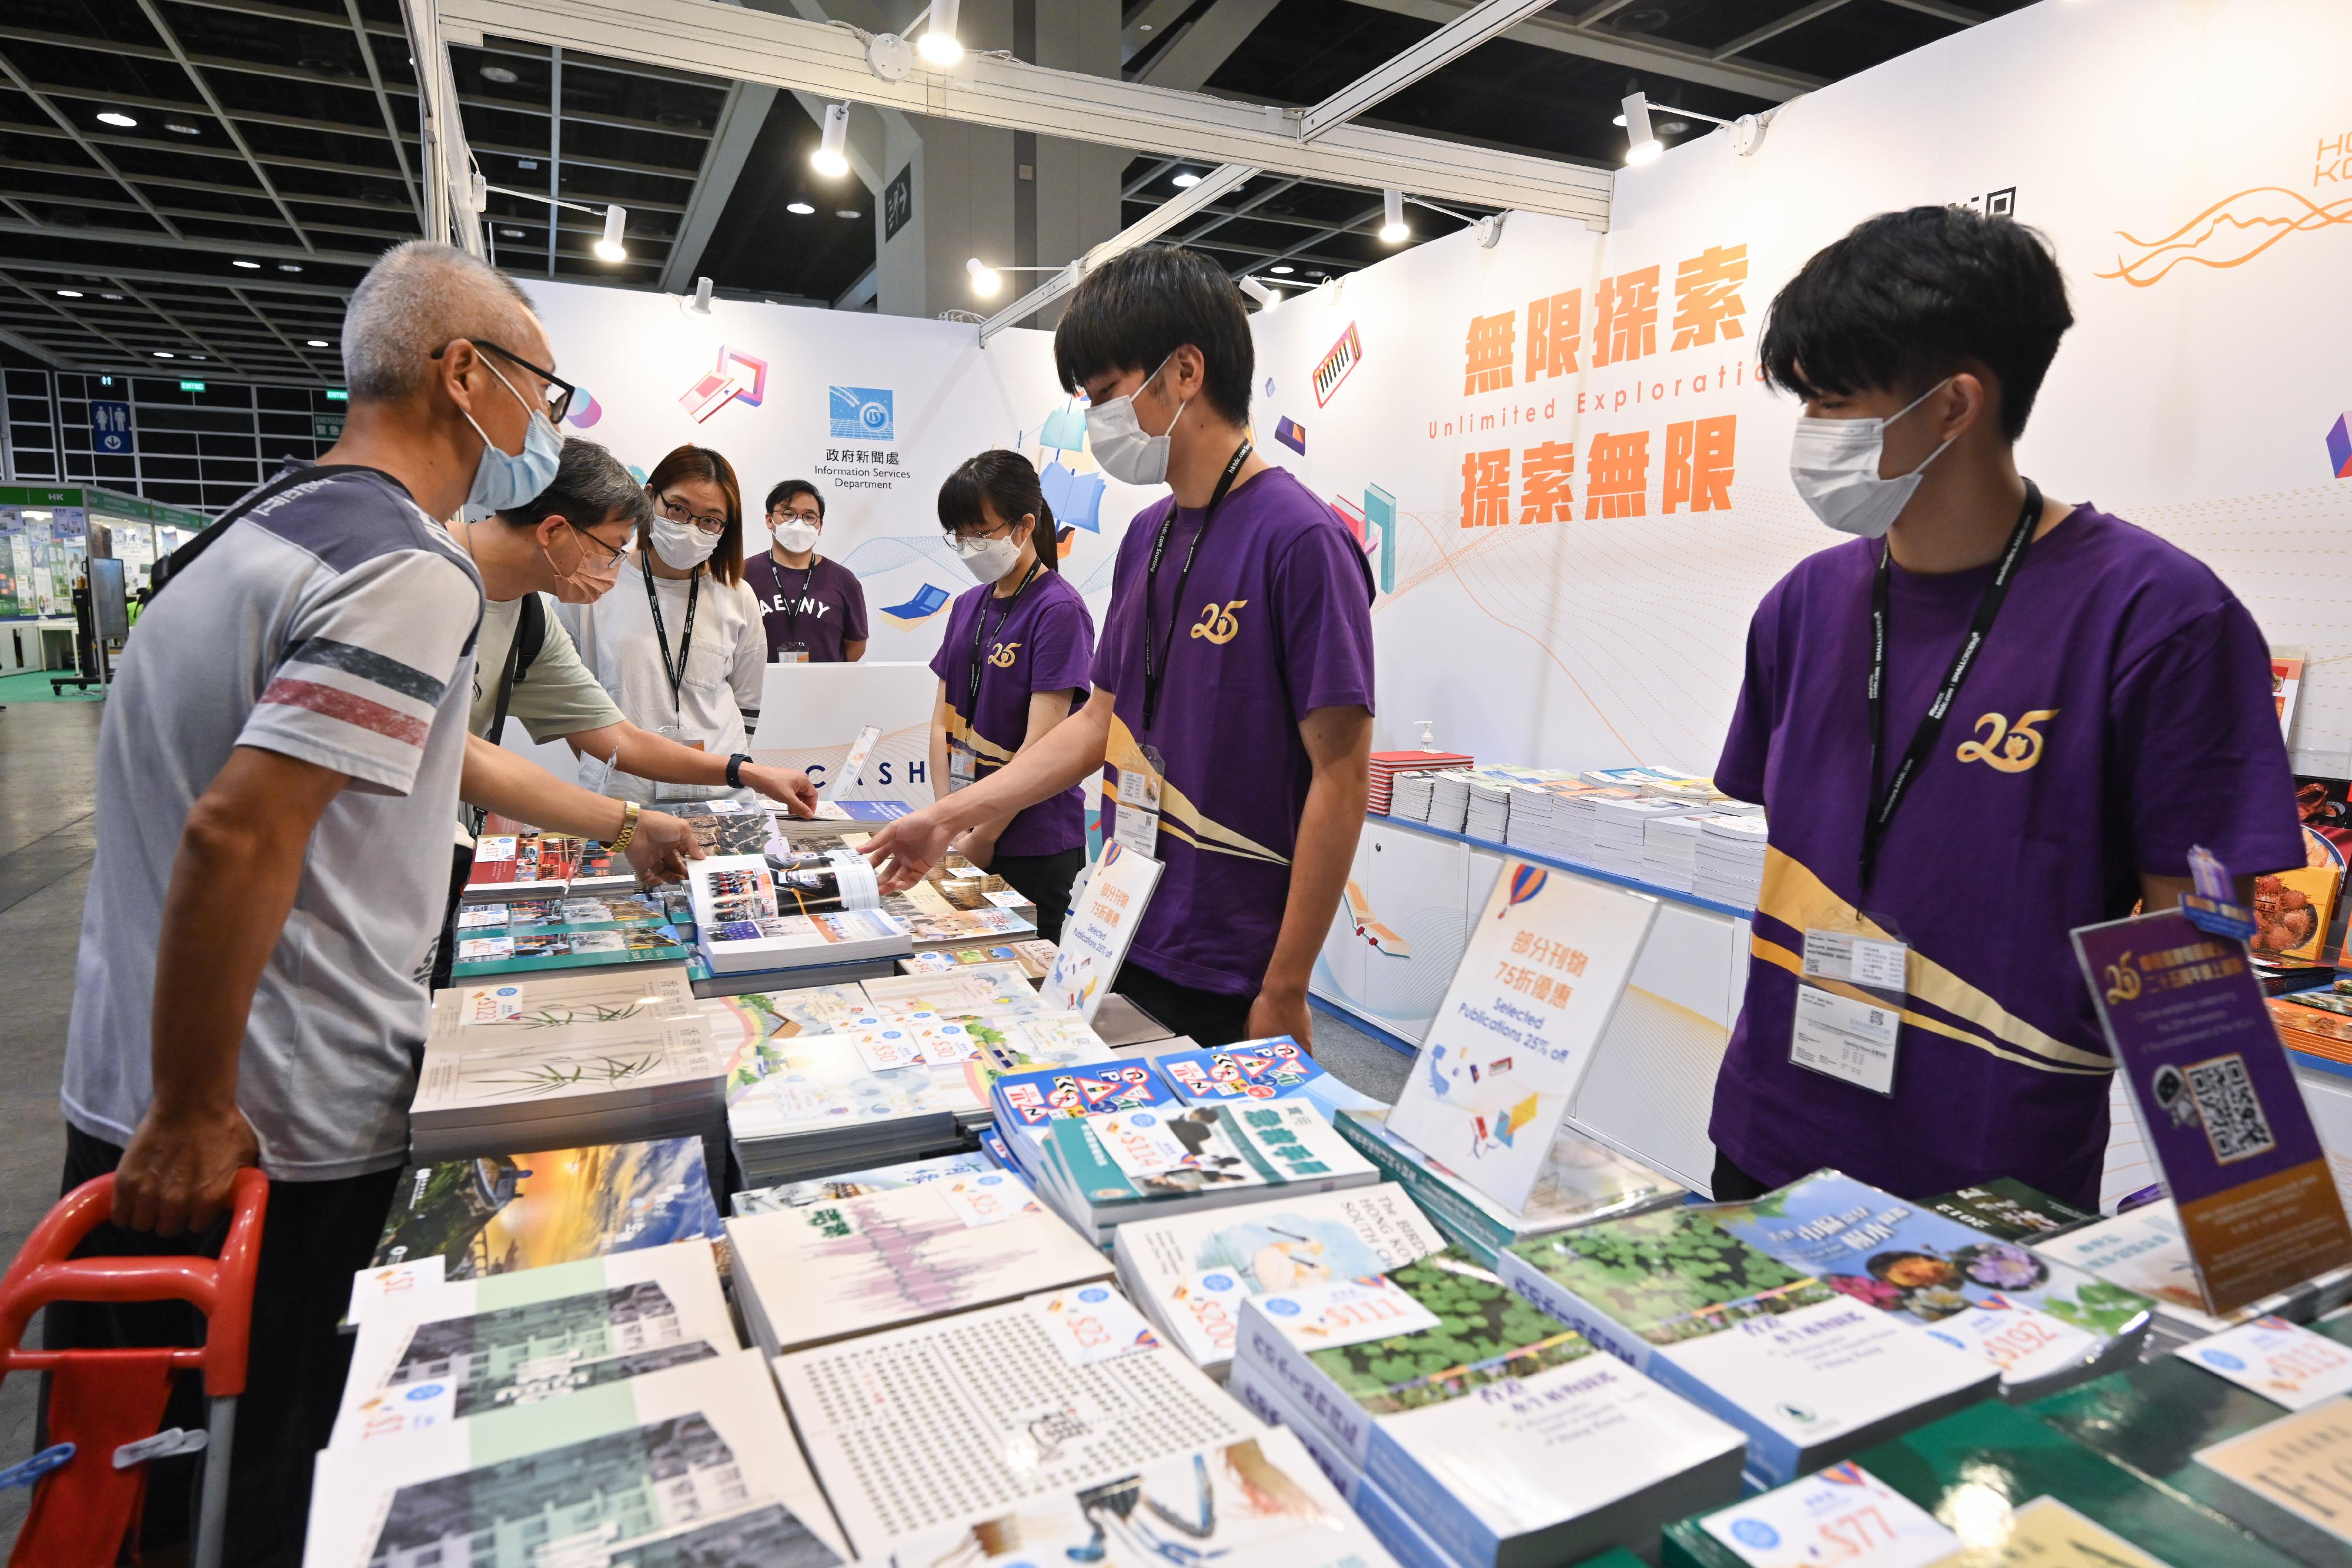 The Information Services Department is taking part in this year's Hong Kong Book Fair from today (July 20) to July 26 under the theme "Unlimited Exploration". Over 70 government titles are on sale at the fair, most of them being sold at a 25 per cent discount or below.